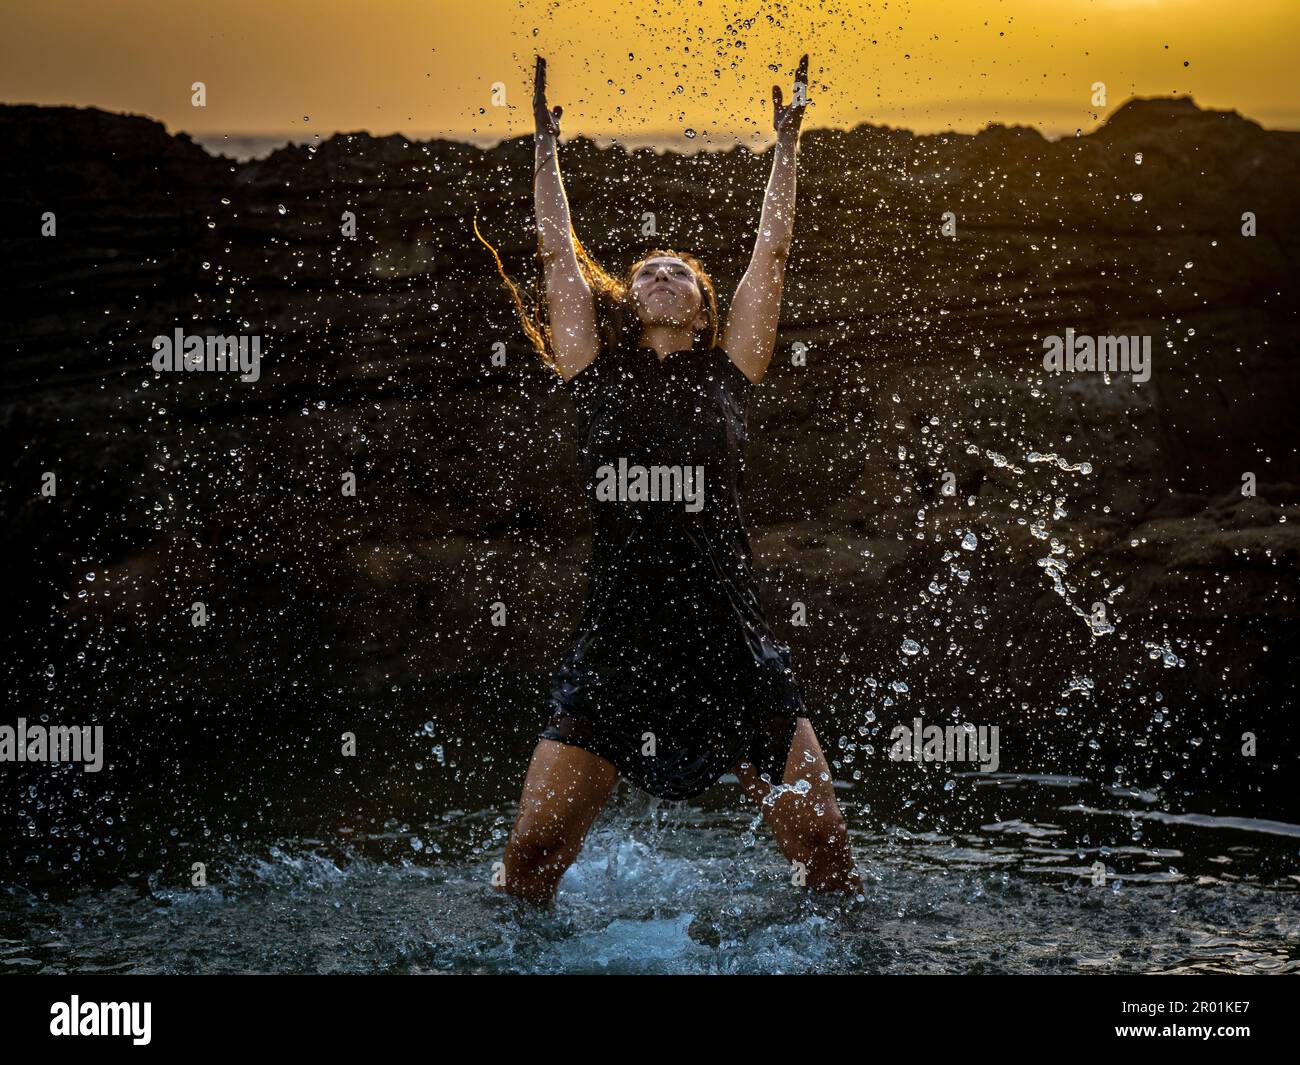 middle-aged woman dancing and throwing water in the air, Maioris beach, llucmajor, Majorca, Balearic Islands, Spain. Stock Photo